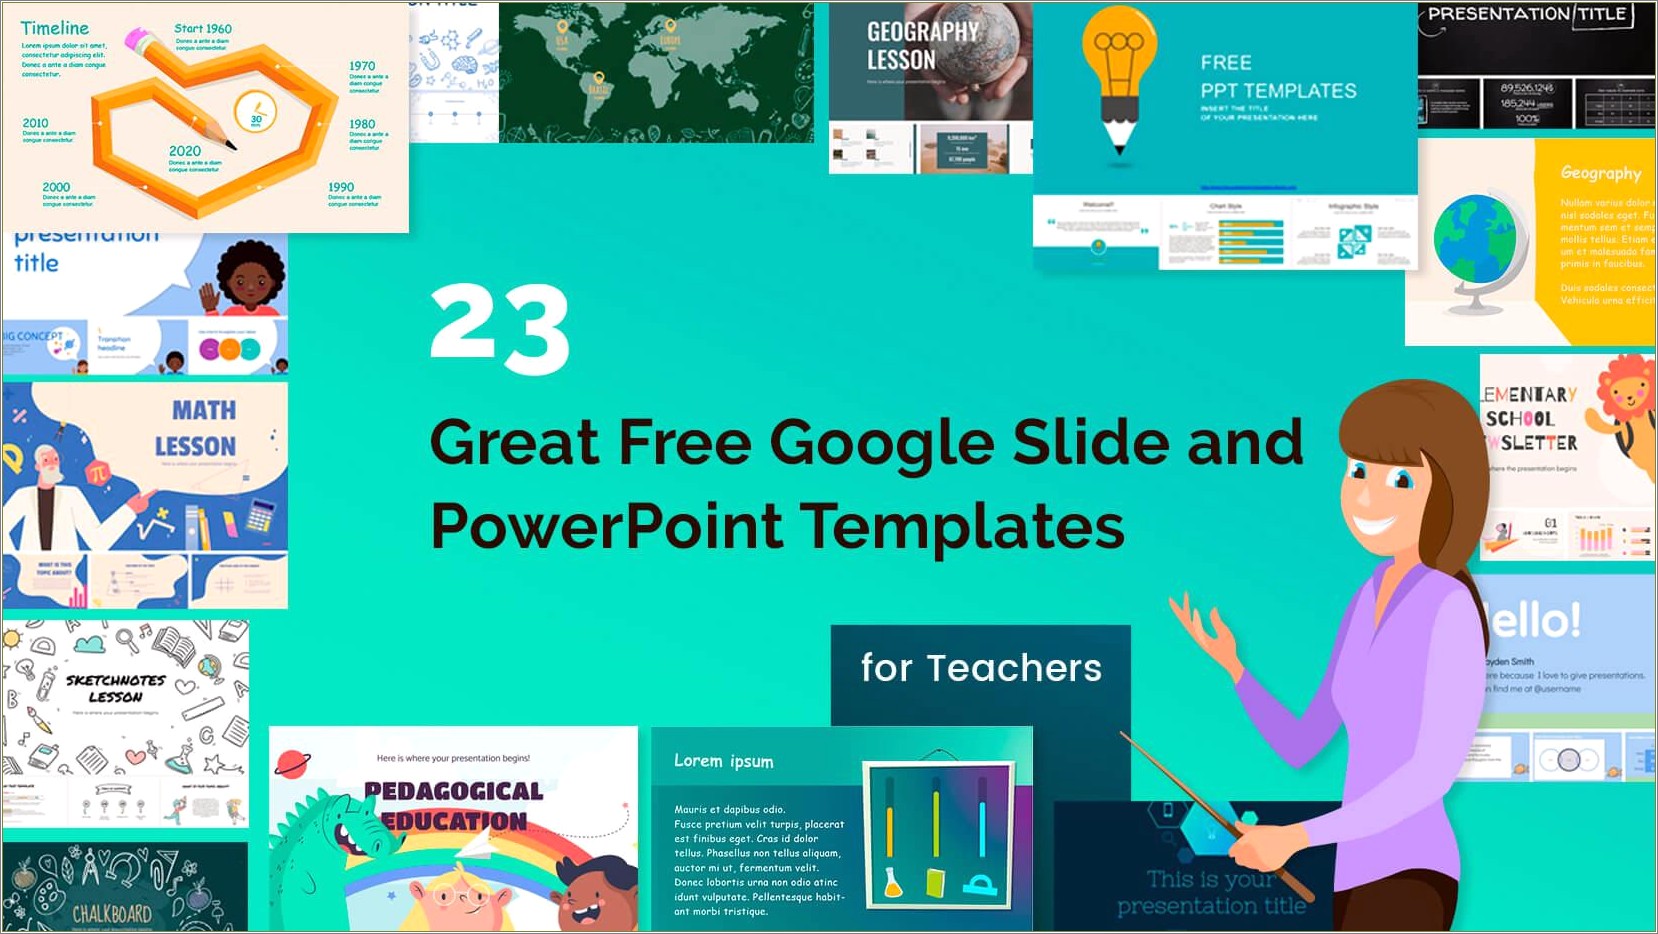 Free Google Template For Presentation In Education